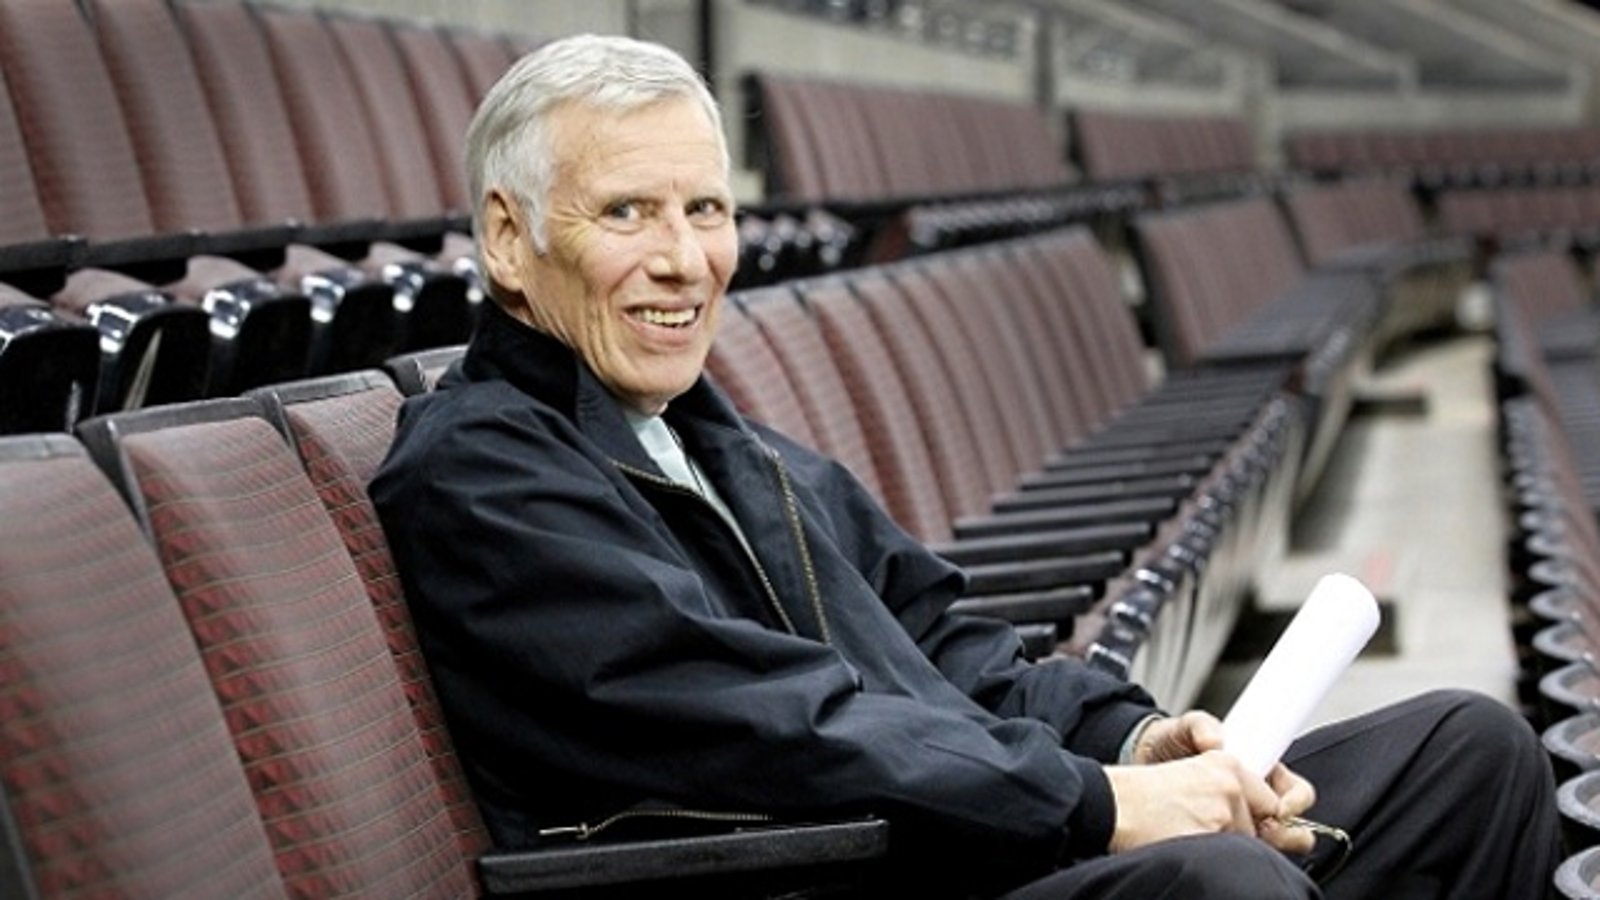 Breaking: Pens' radio voice Mike Lange to miss start of playoffs due to health scare 